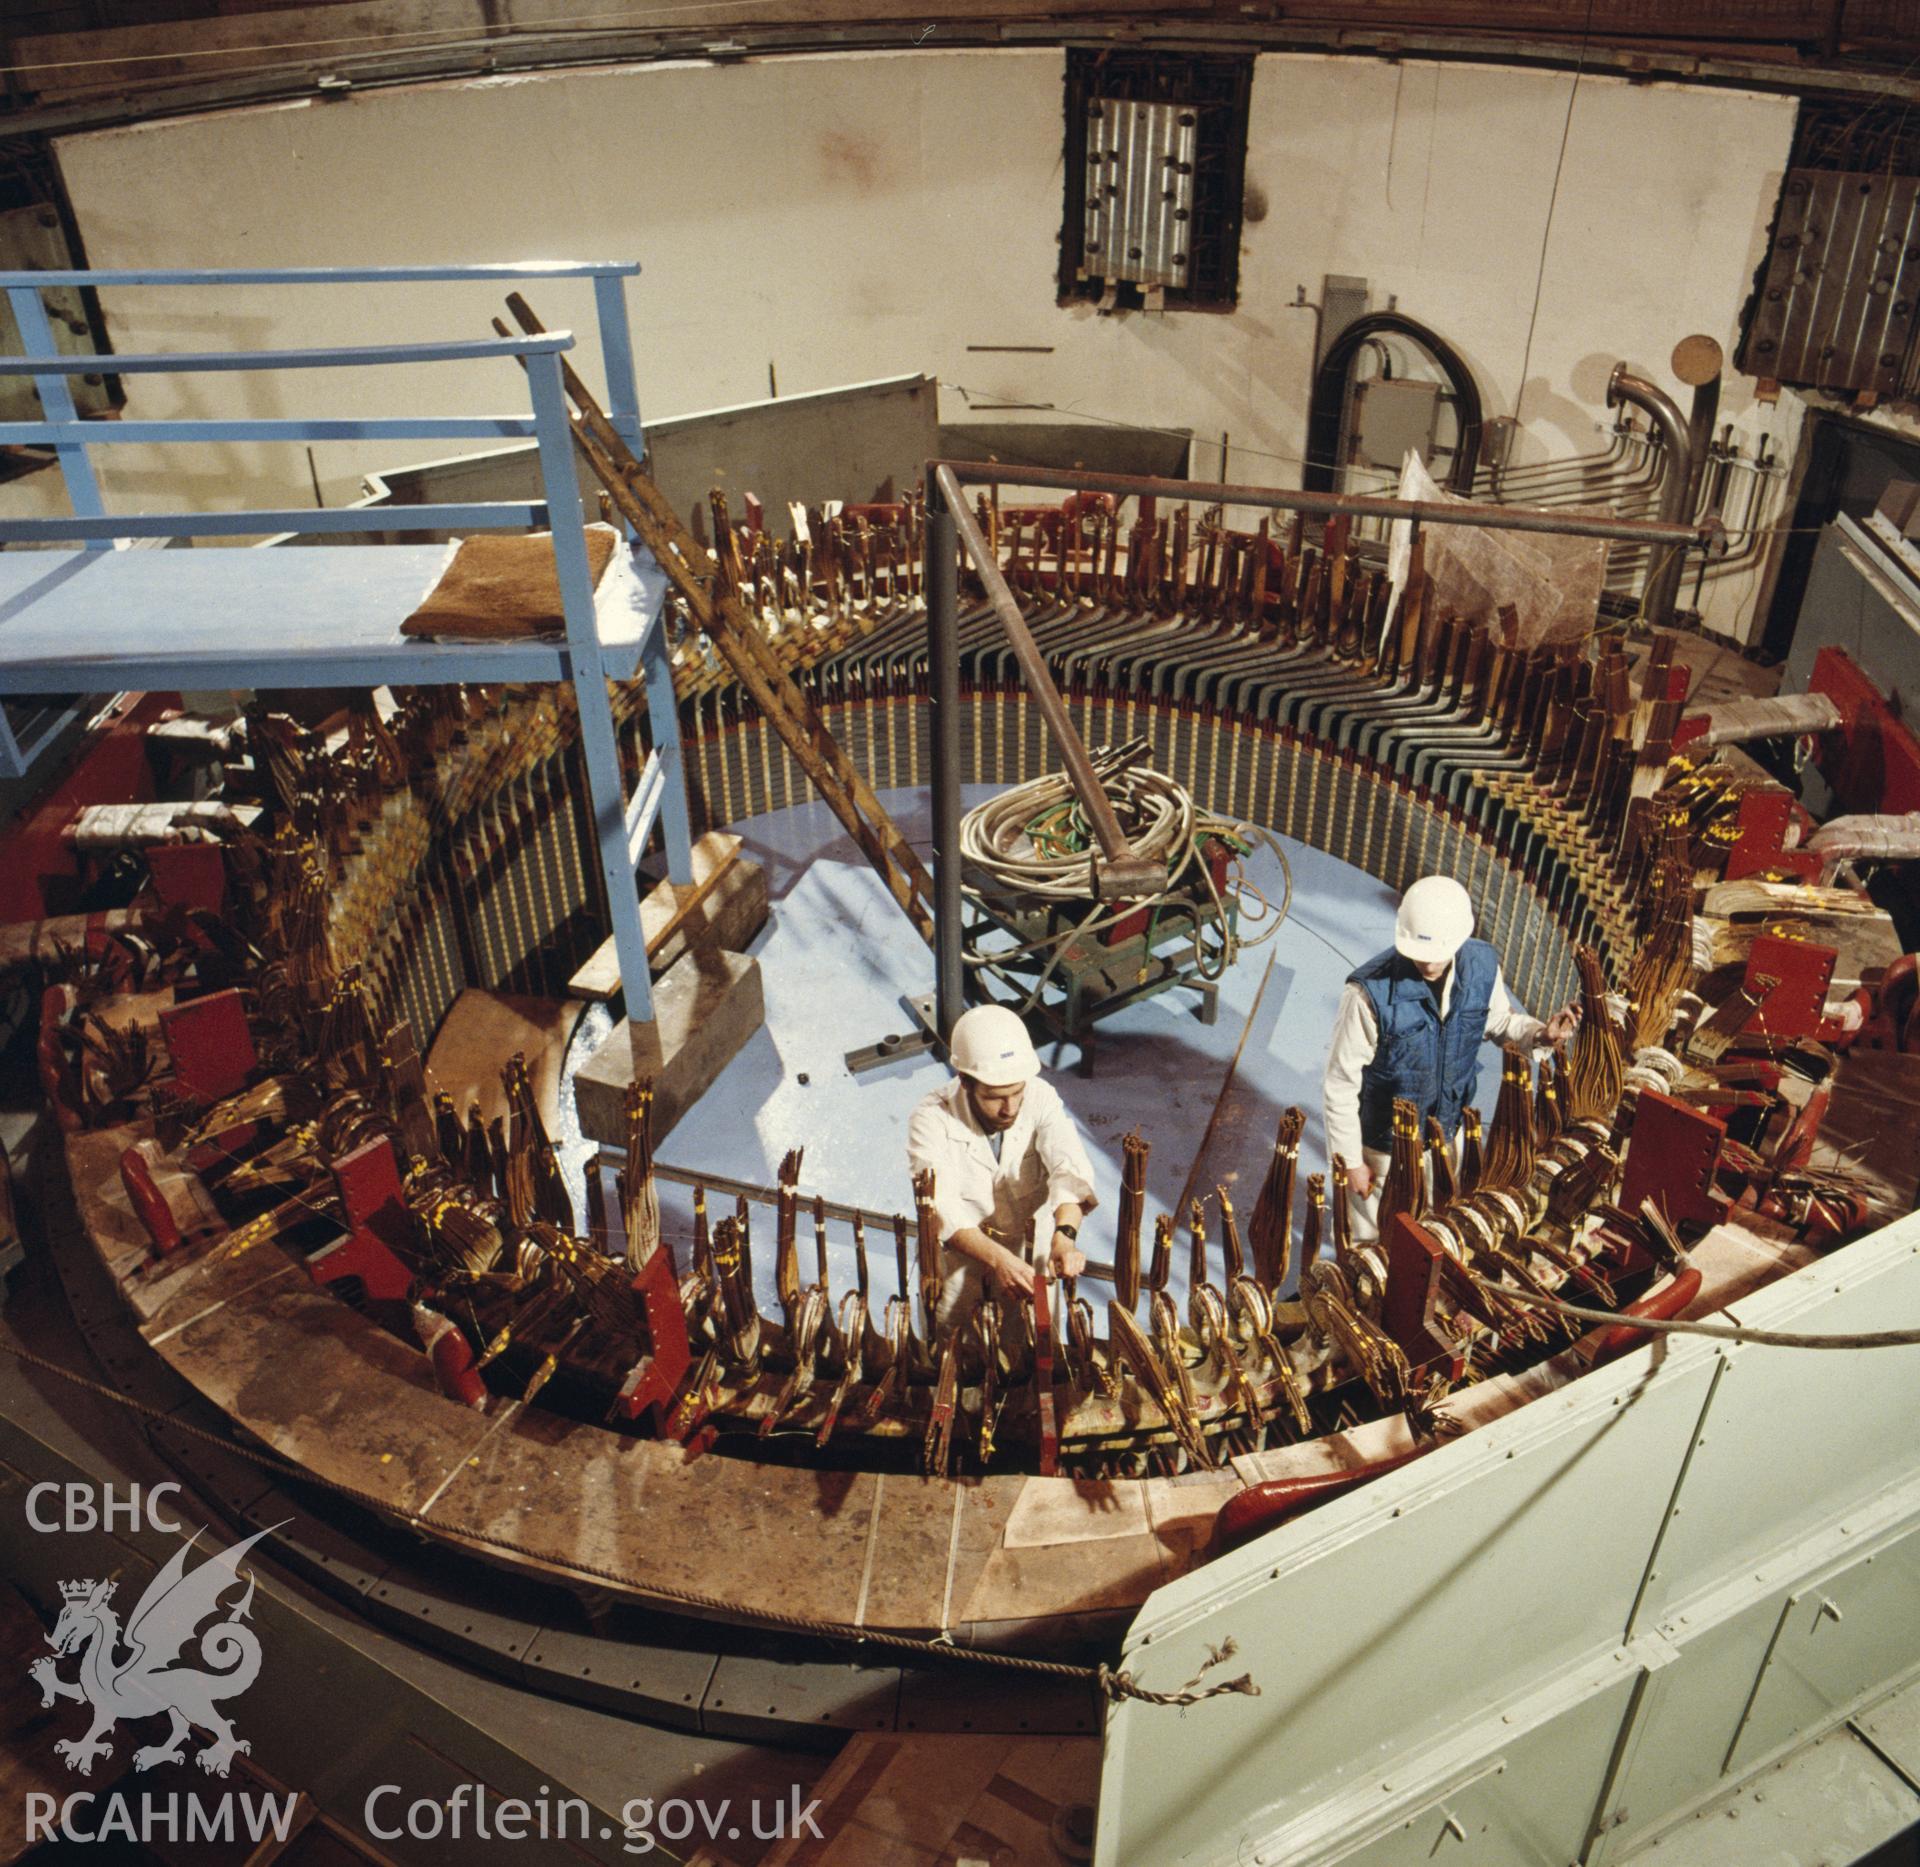 1 colour transparency showing one of the pump turbines under construction at Dinorwig Power Station; collated by the former Central Office of Information.